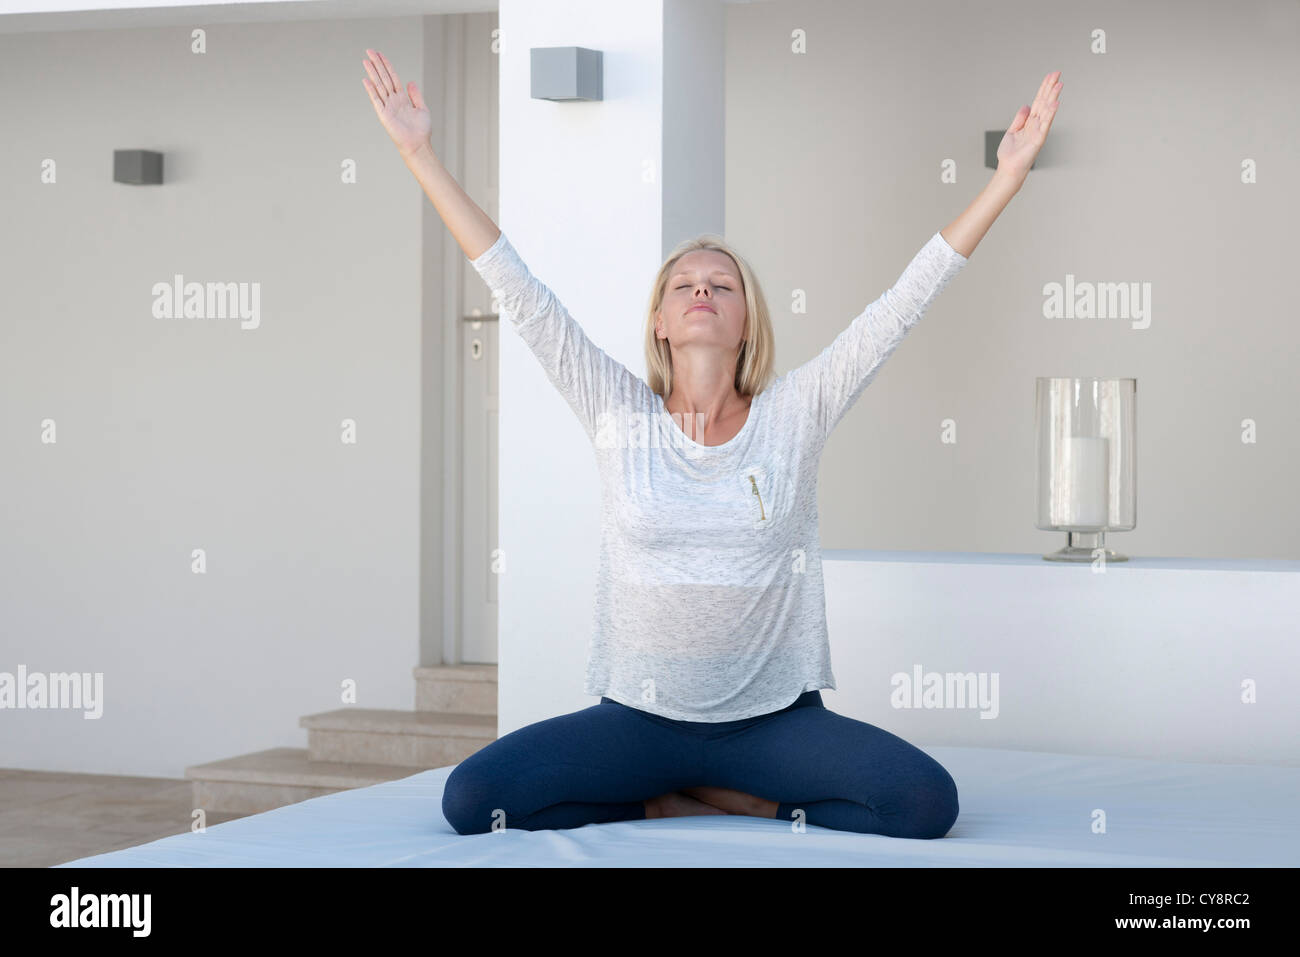 Young woman exercising on bed with arms raised Banque D'Images